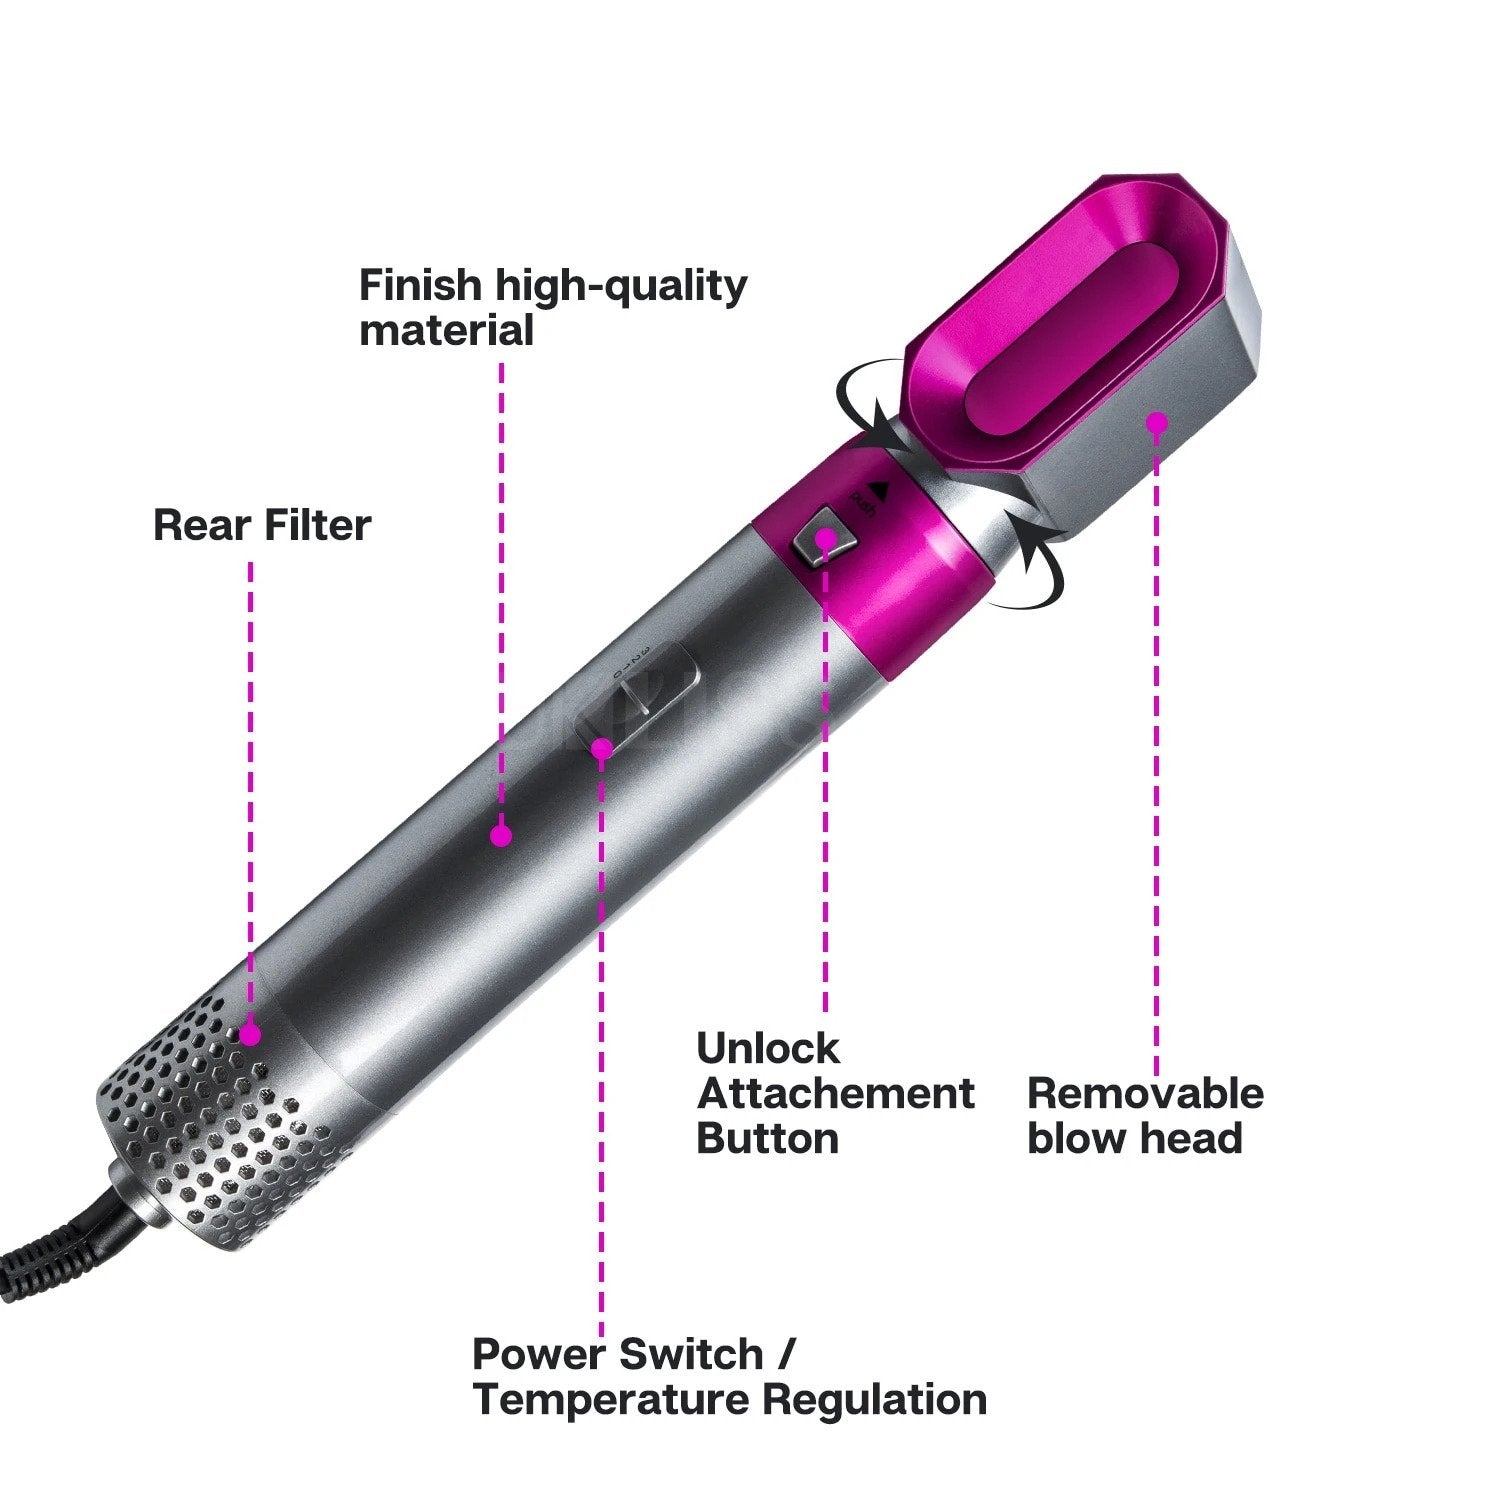 5 in 1 Professional's Choice Hair Styler